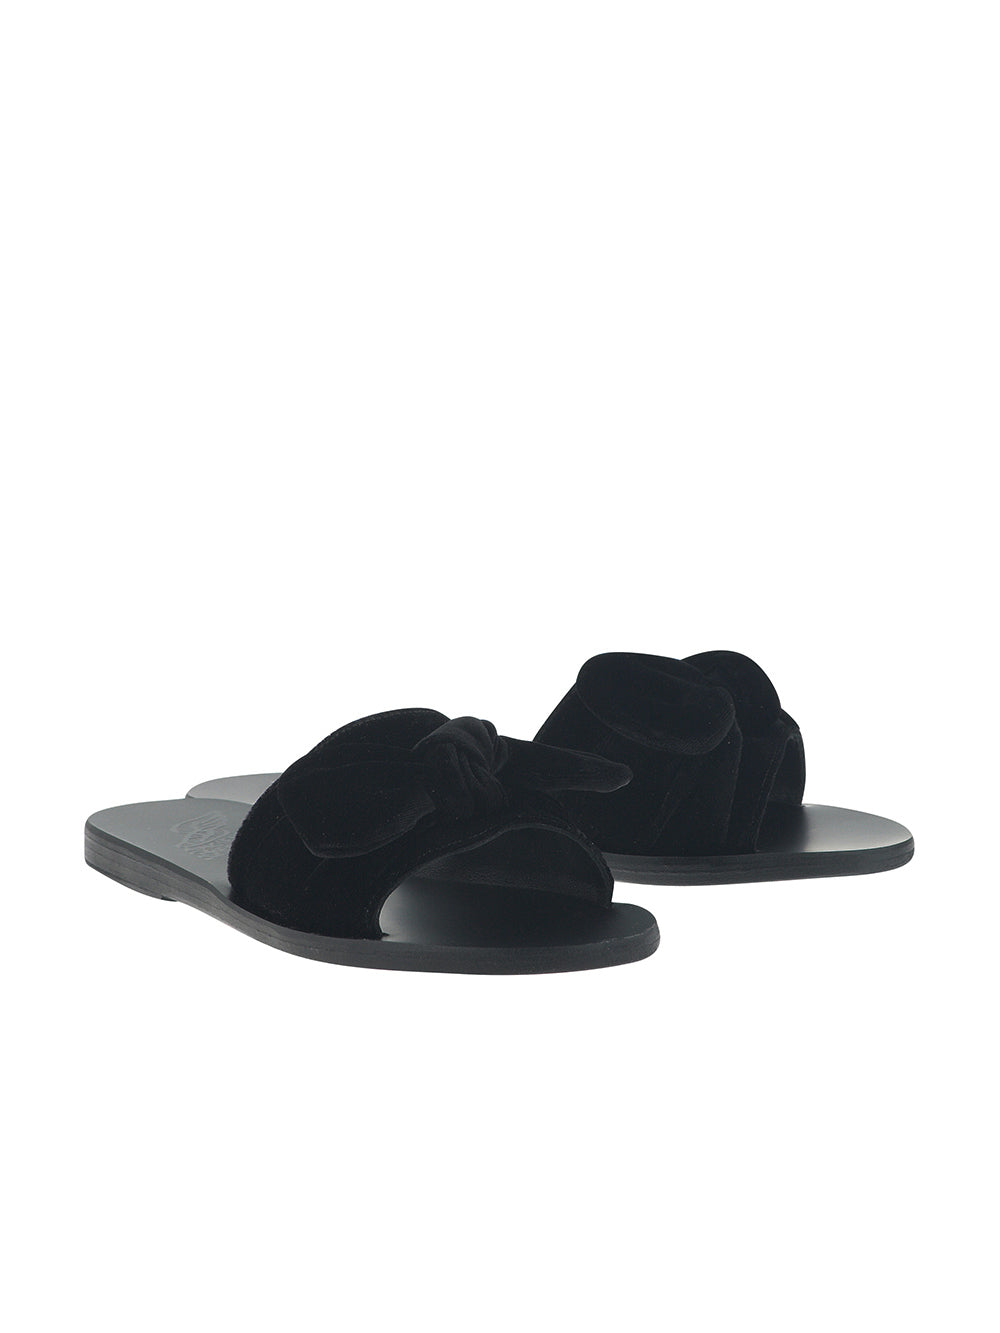 TAYGETE BLACK BOW SANDALS